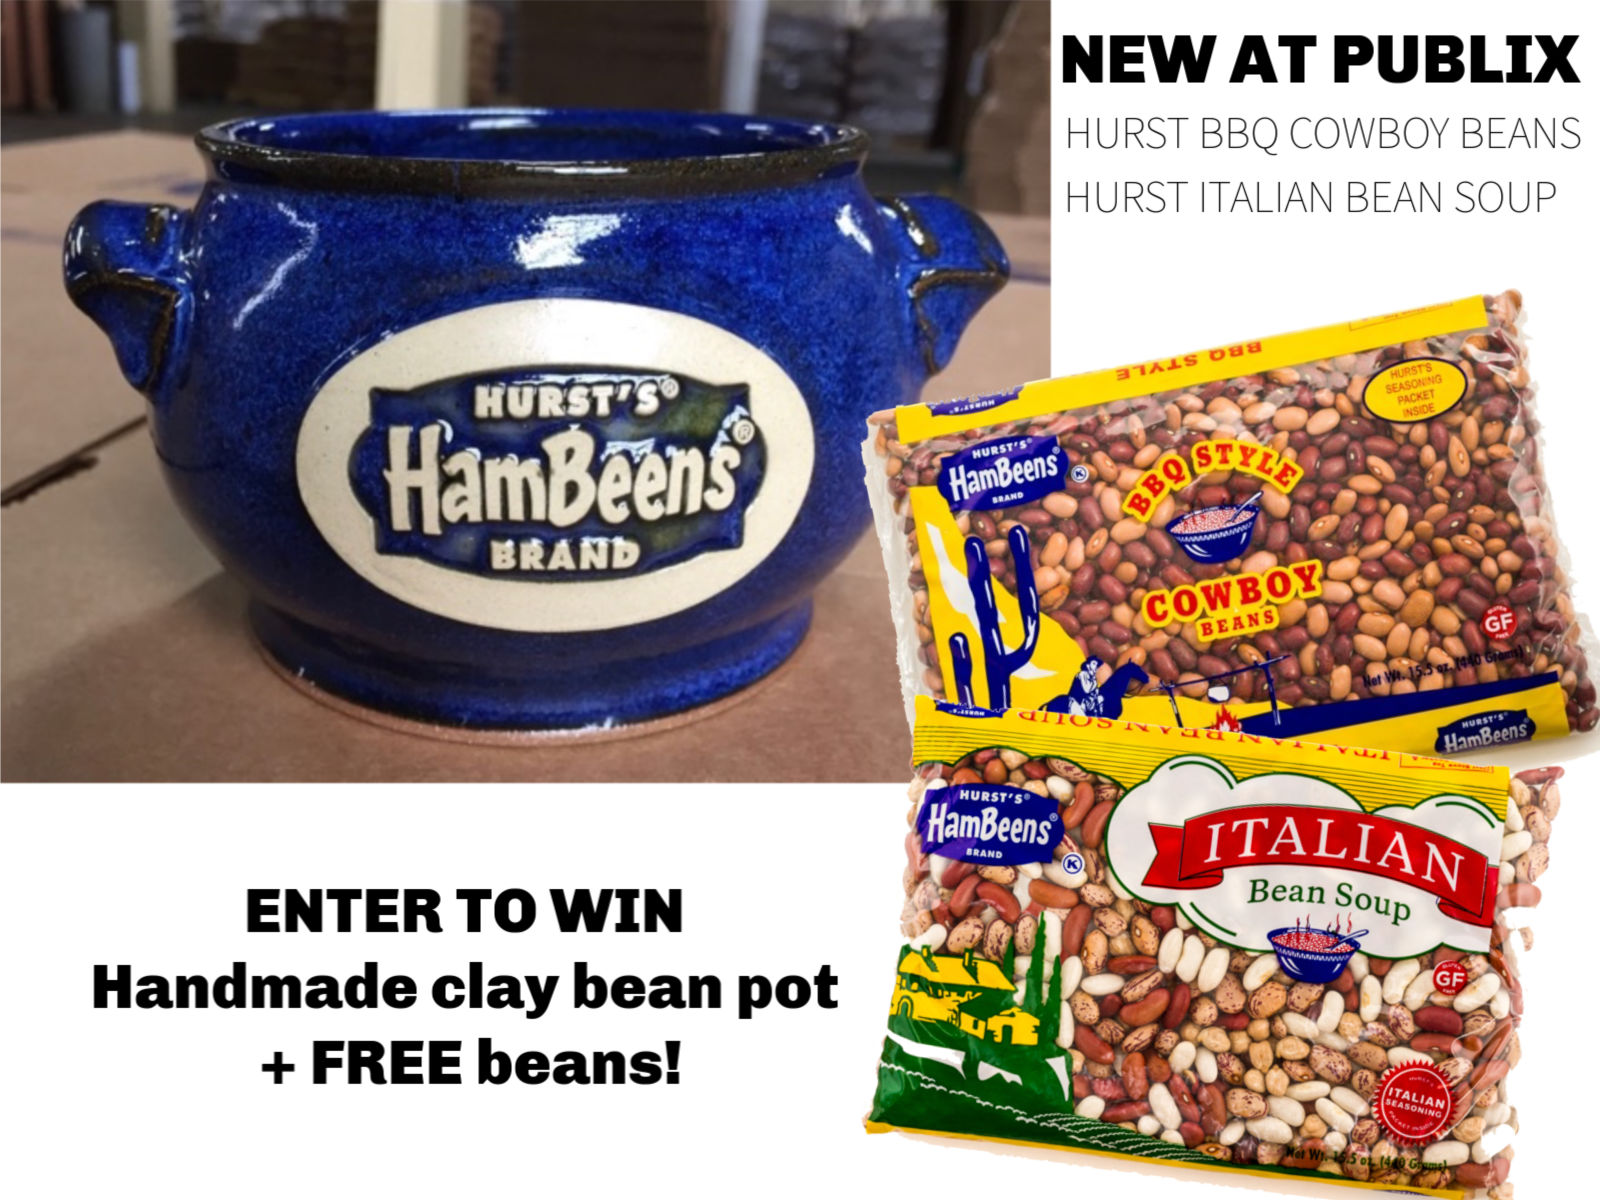 Look For New Hurst Italian Bean Soup And BBQ Cowboy Beans At Publix + Enter To Win Some Great Prizes! on I Heart Publix